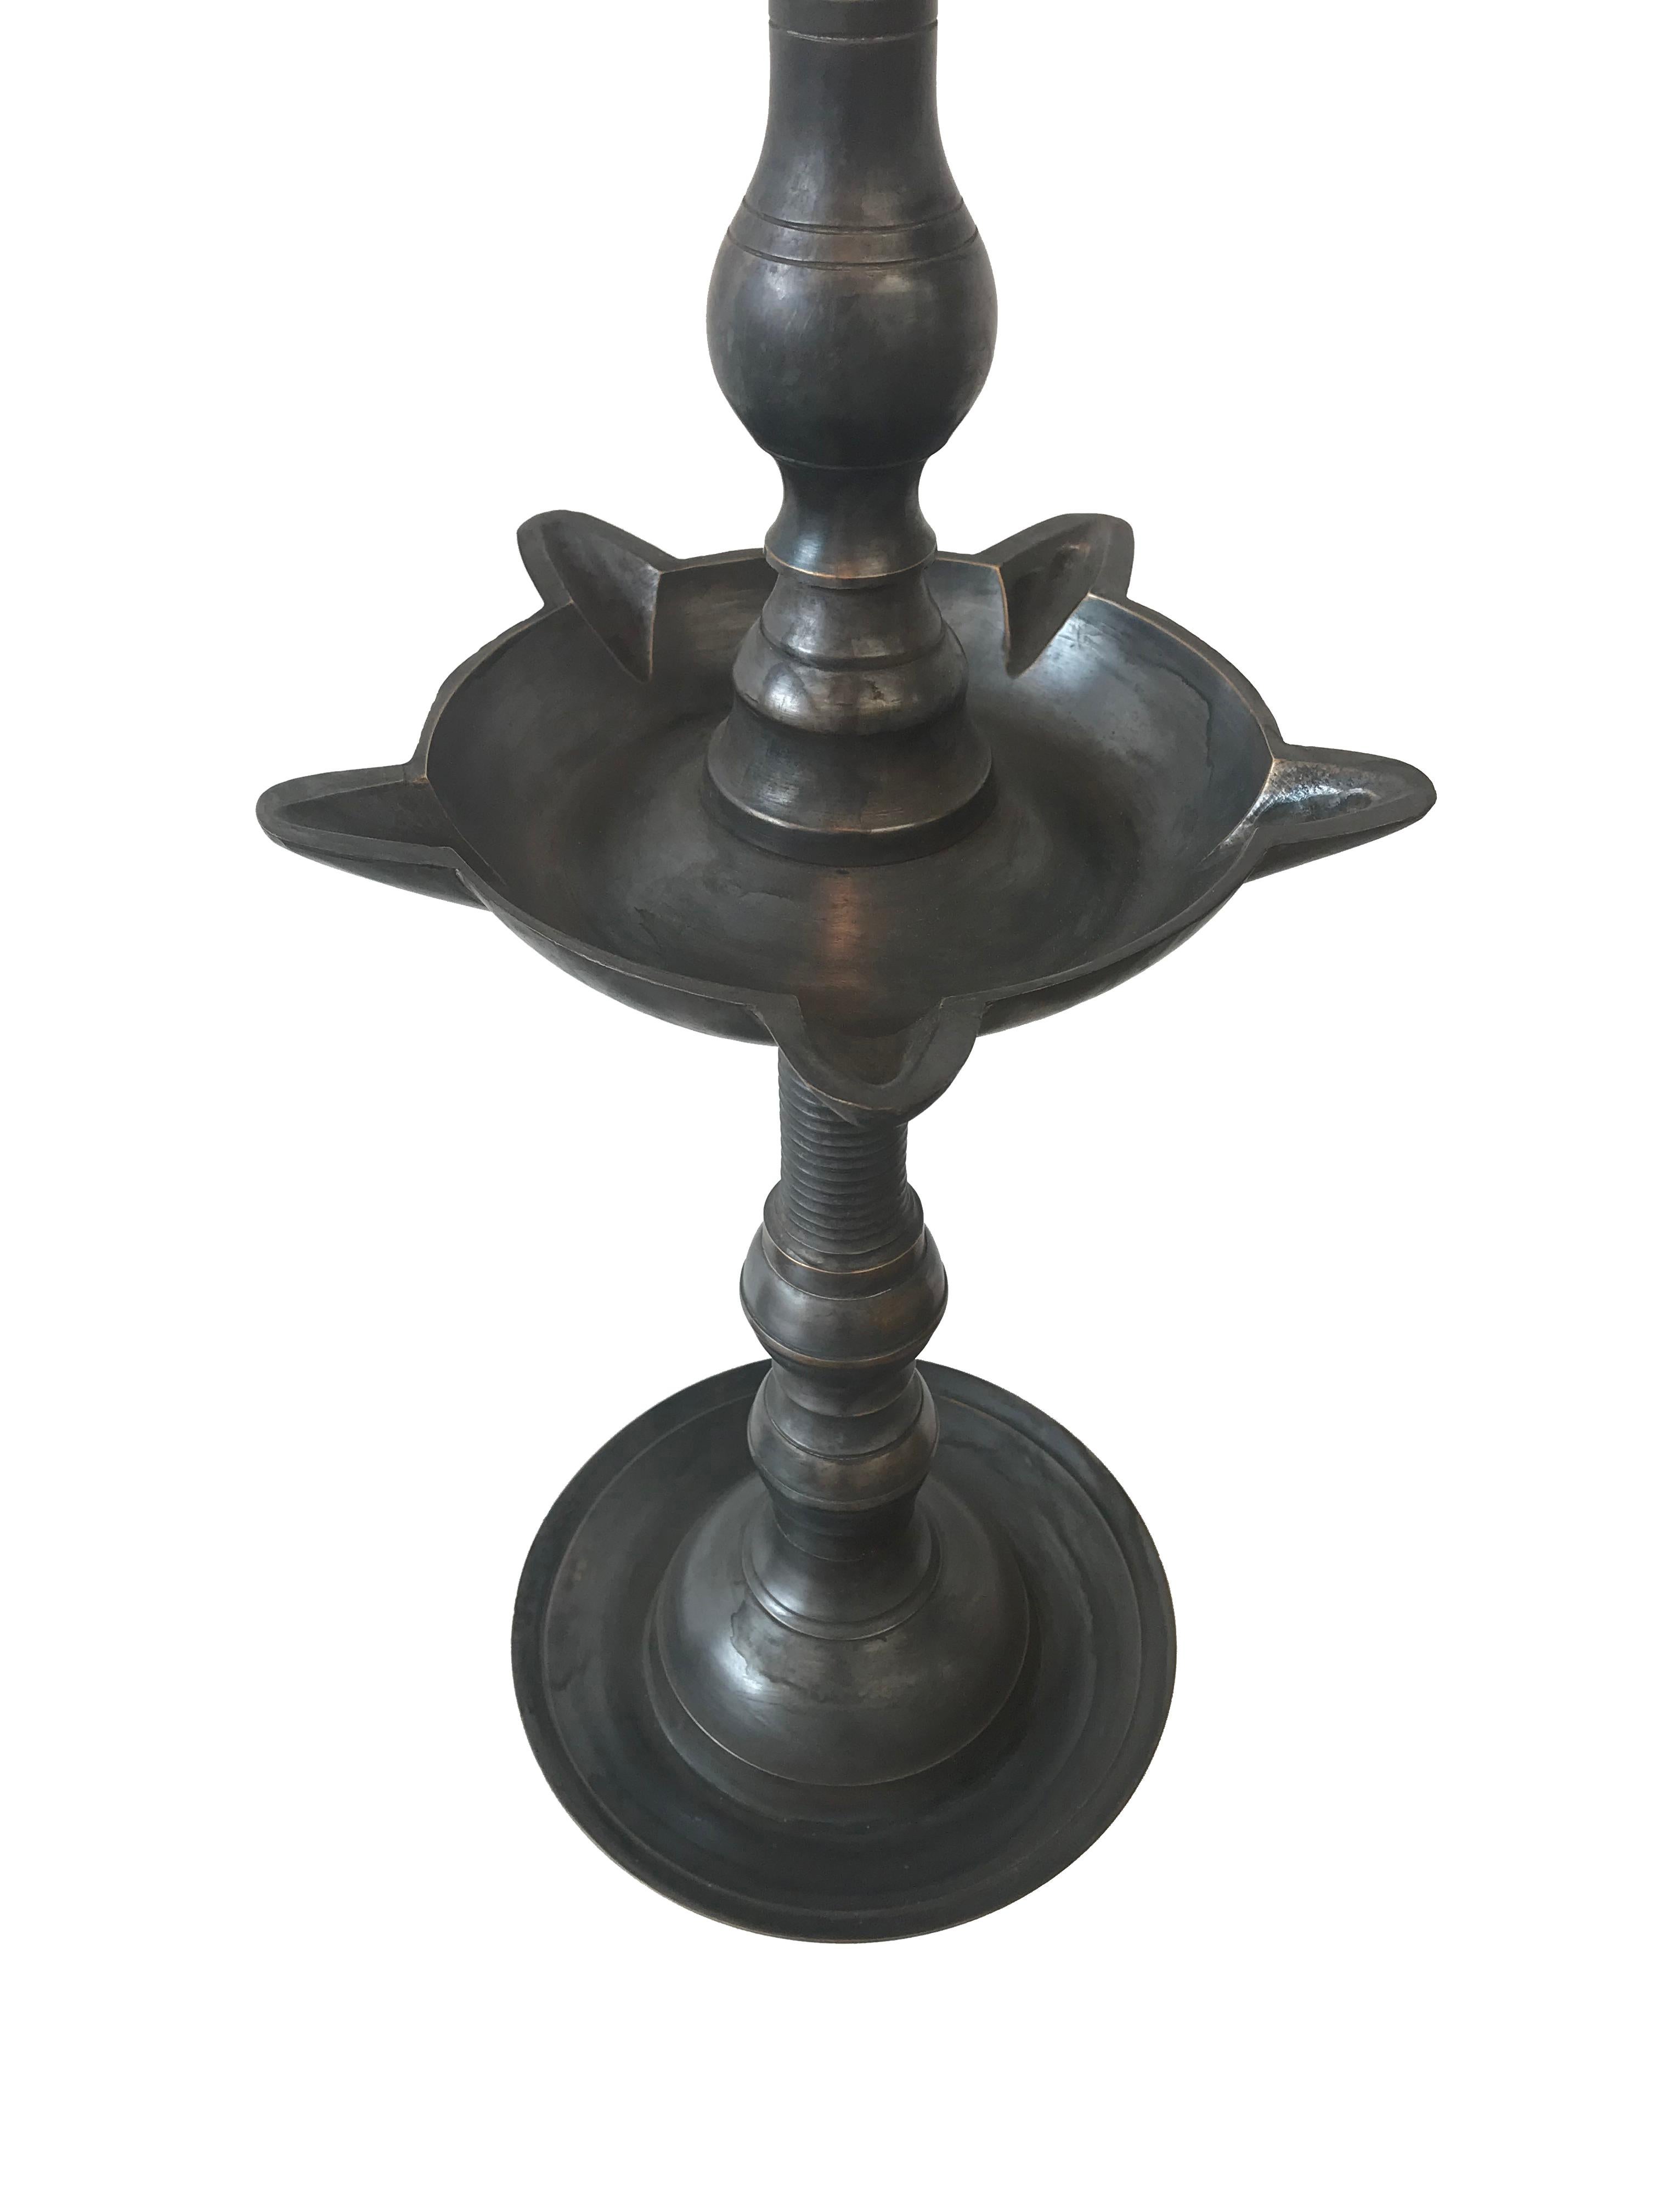 Bronzed Brass Table Lamp - Oil Lamp Conversion For Sale